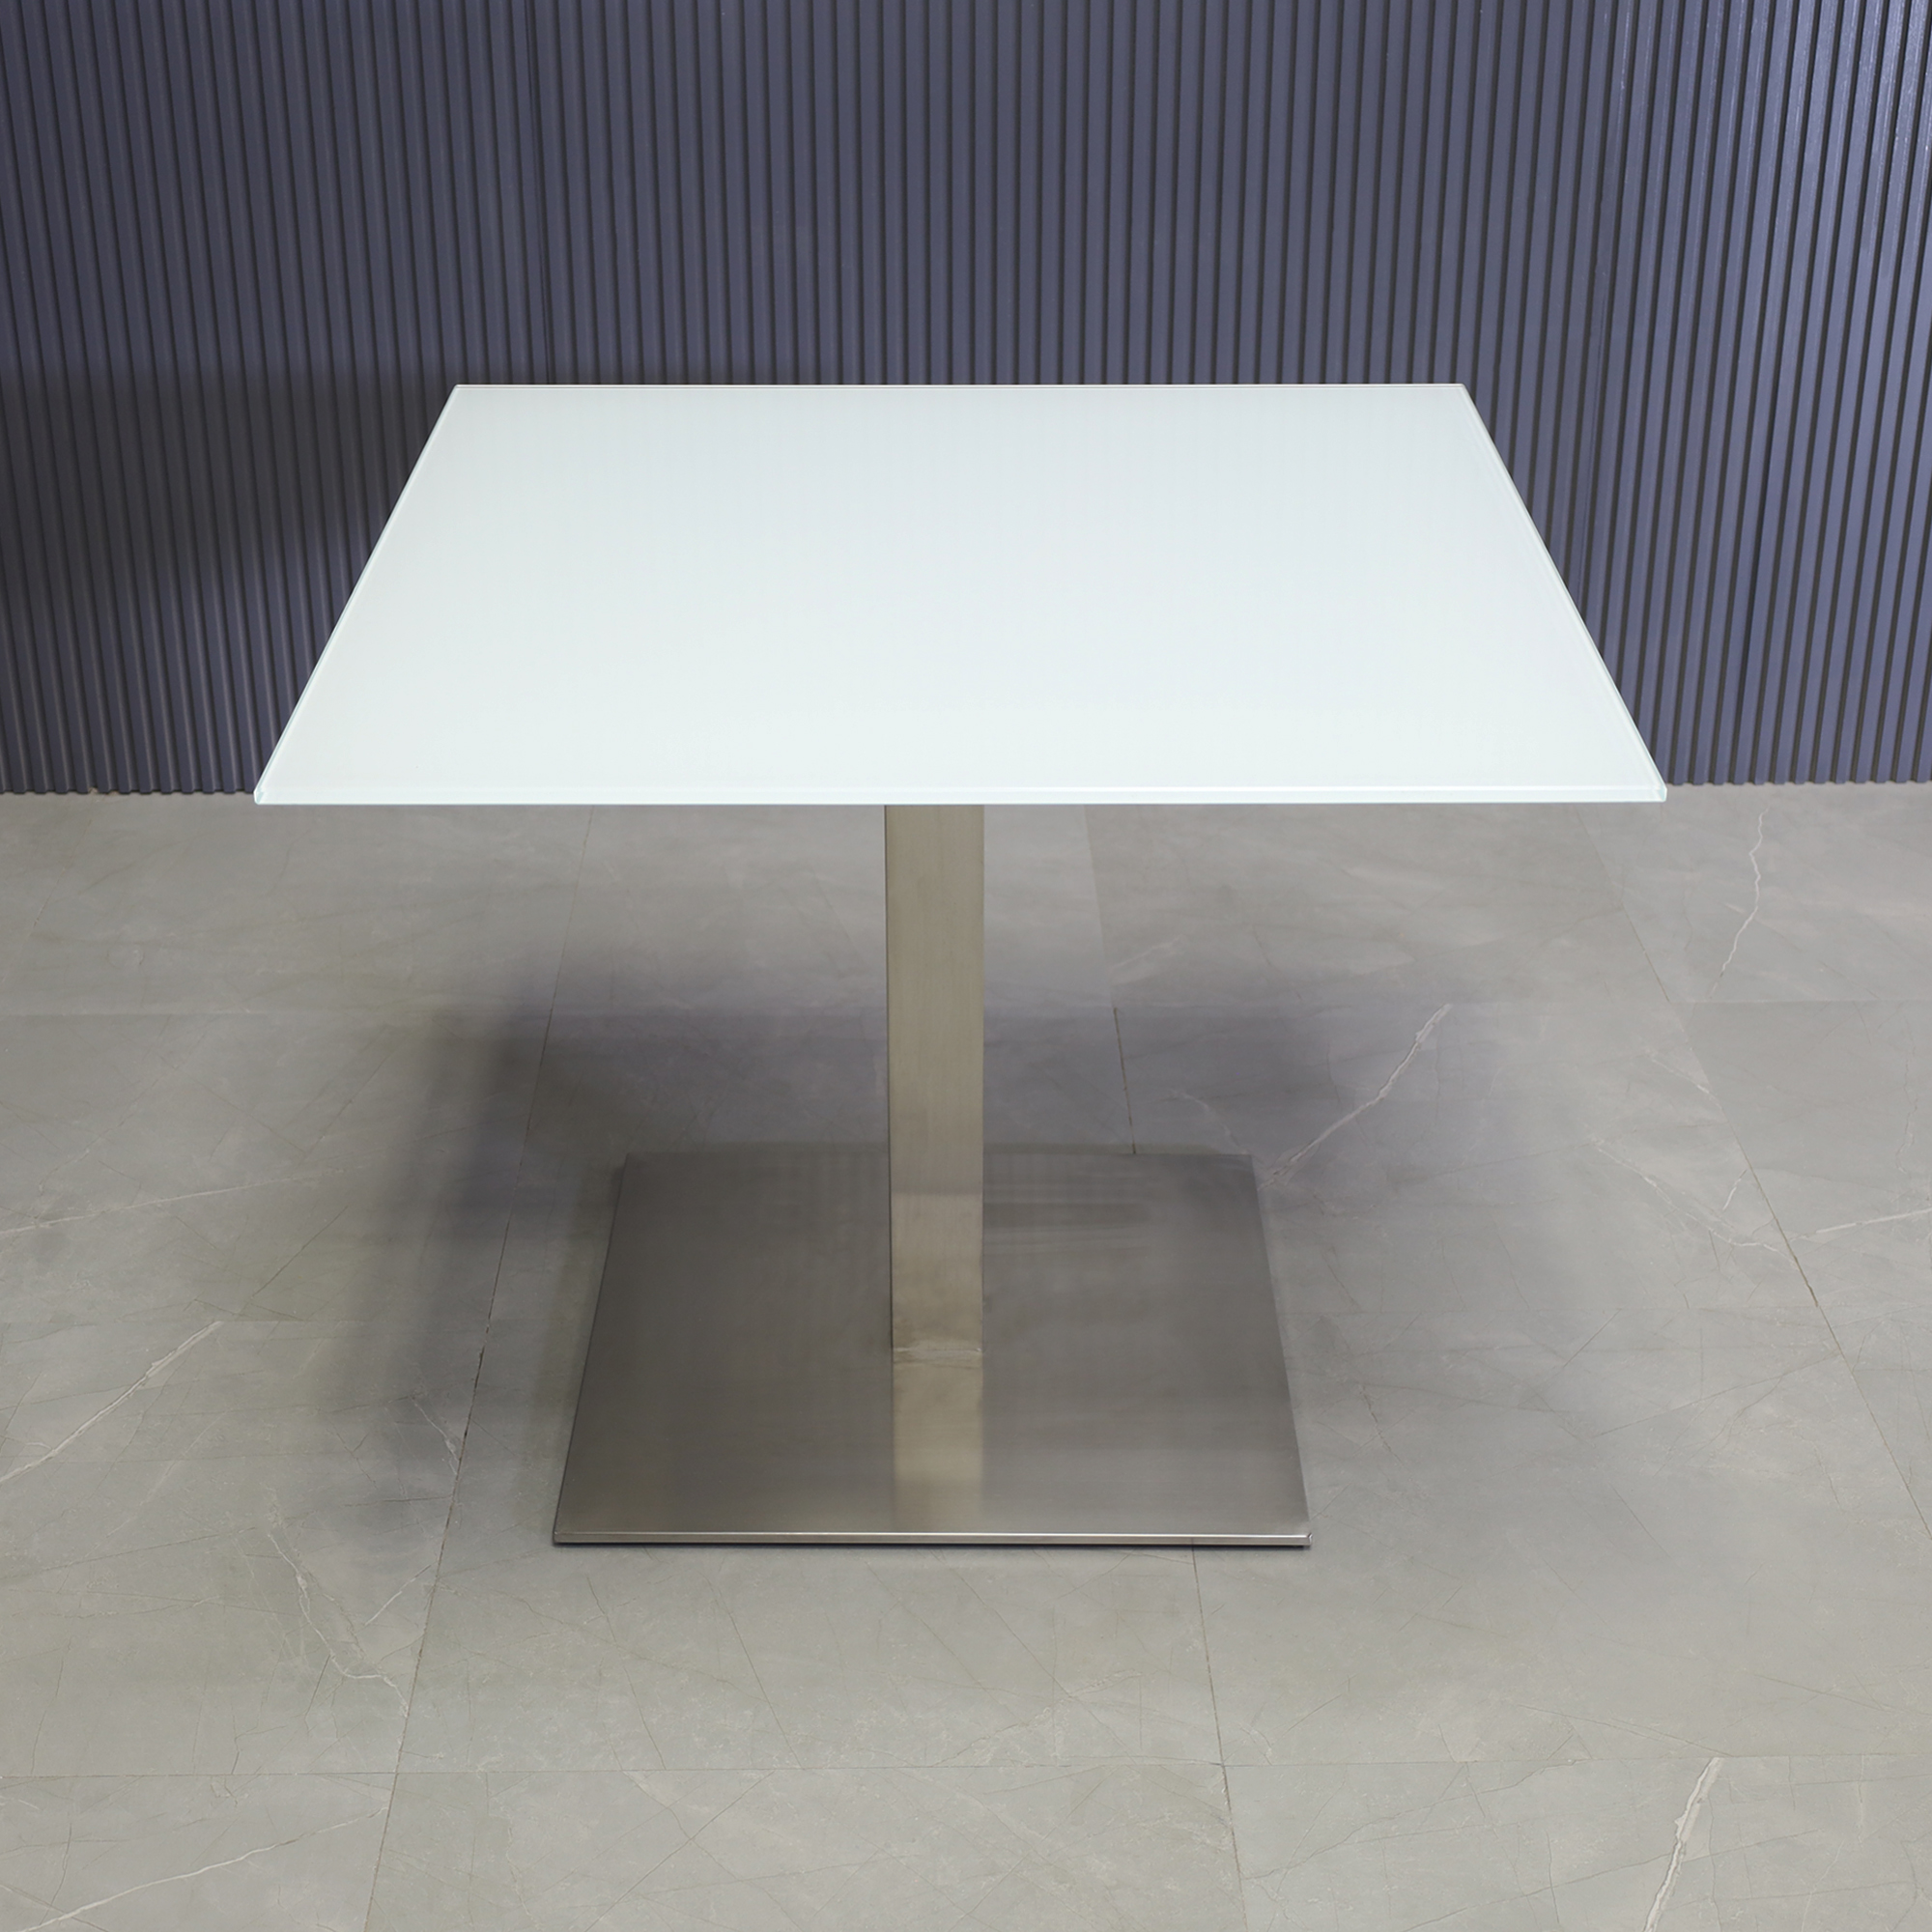 32-inch California Square Conference Table with 1/2